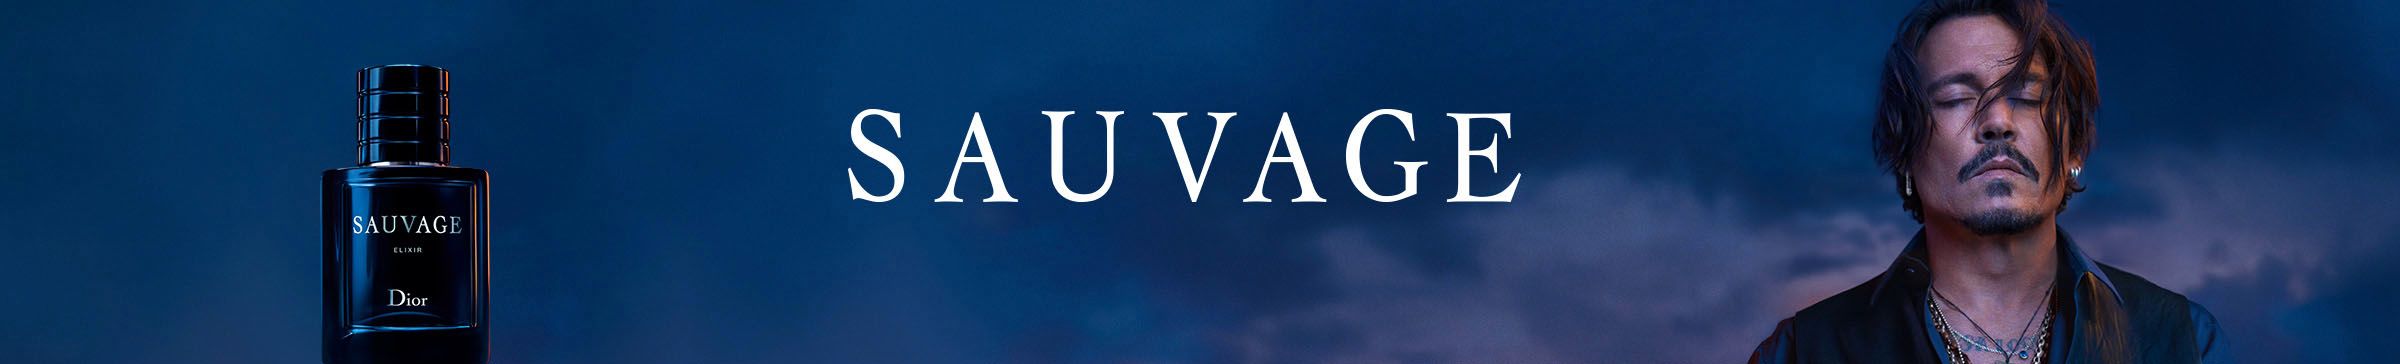 Sauvage for Men by Dior